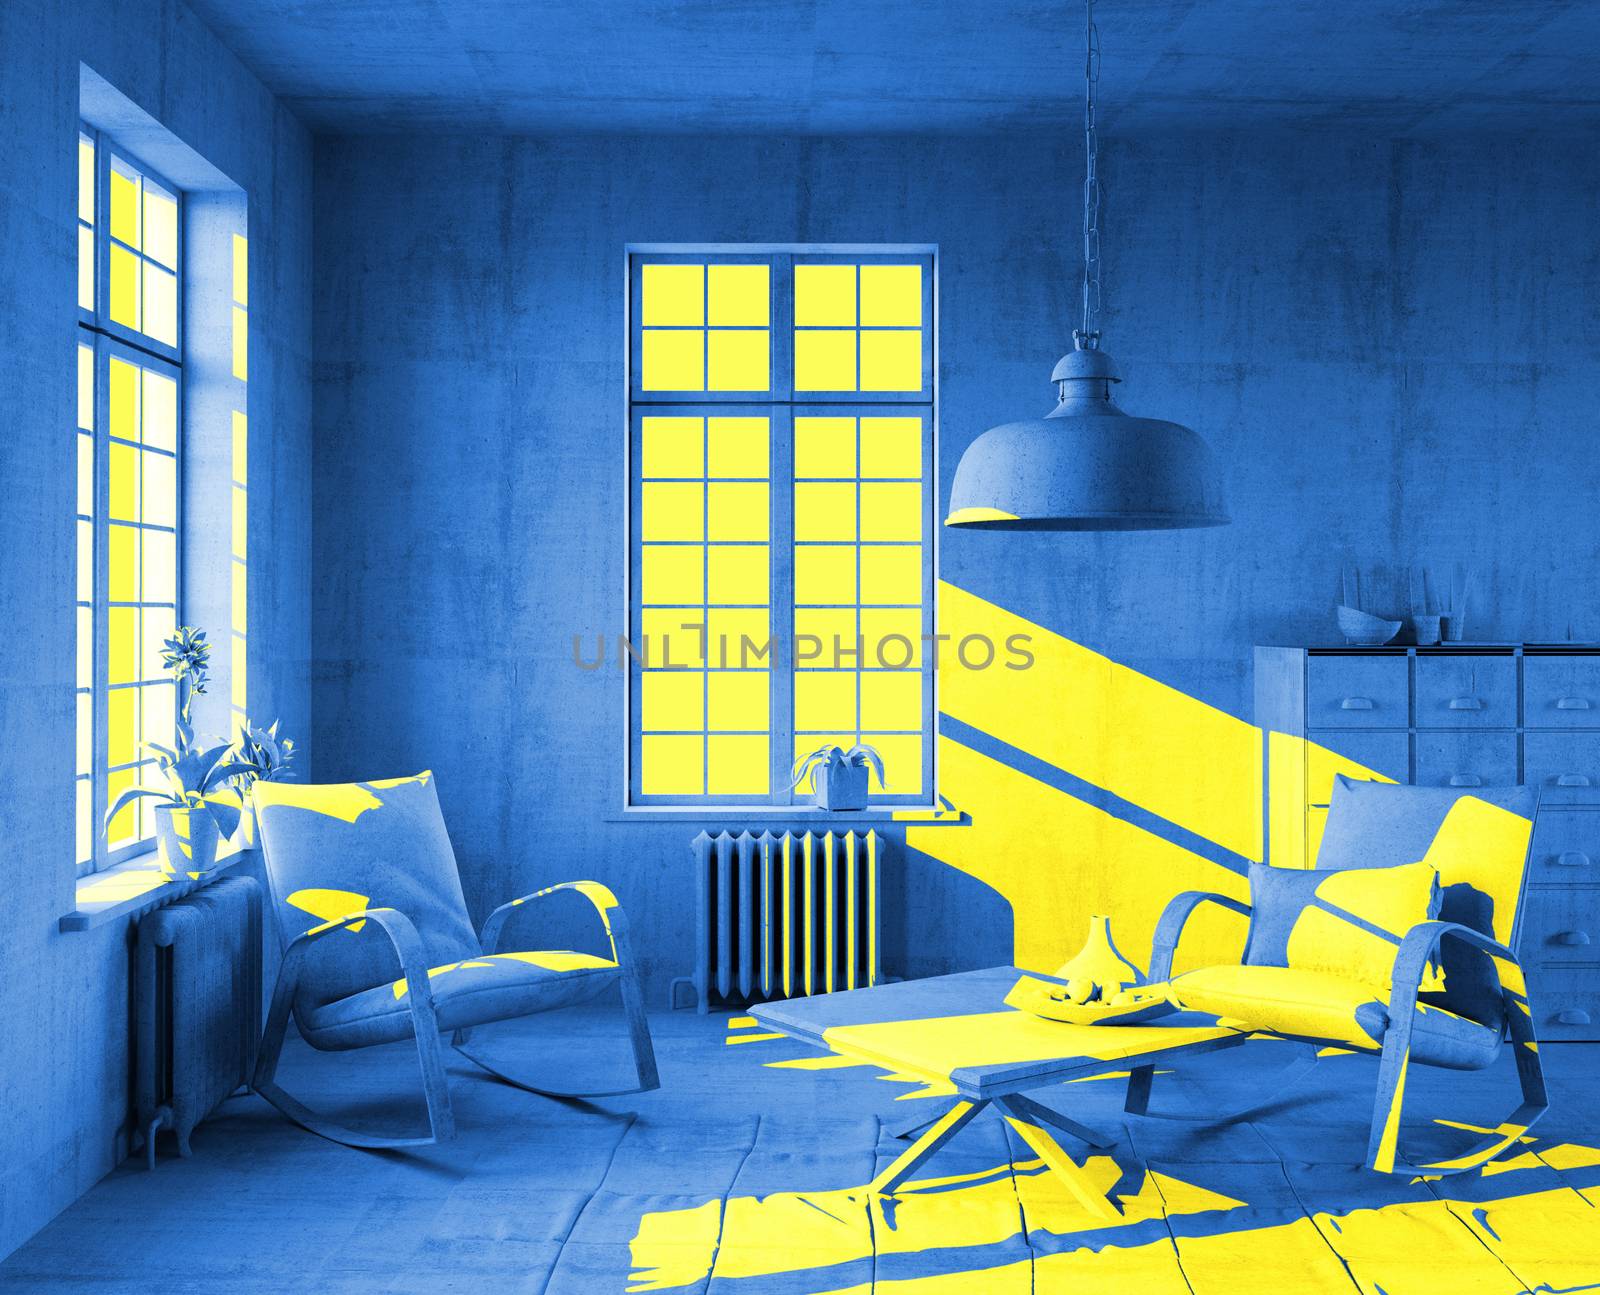 yellow sunlight in art-style interior. 3d concept